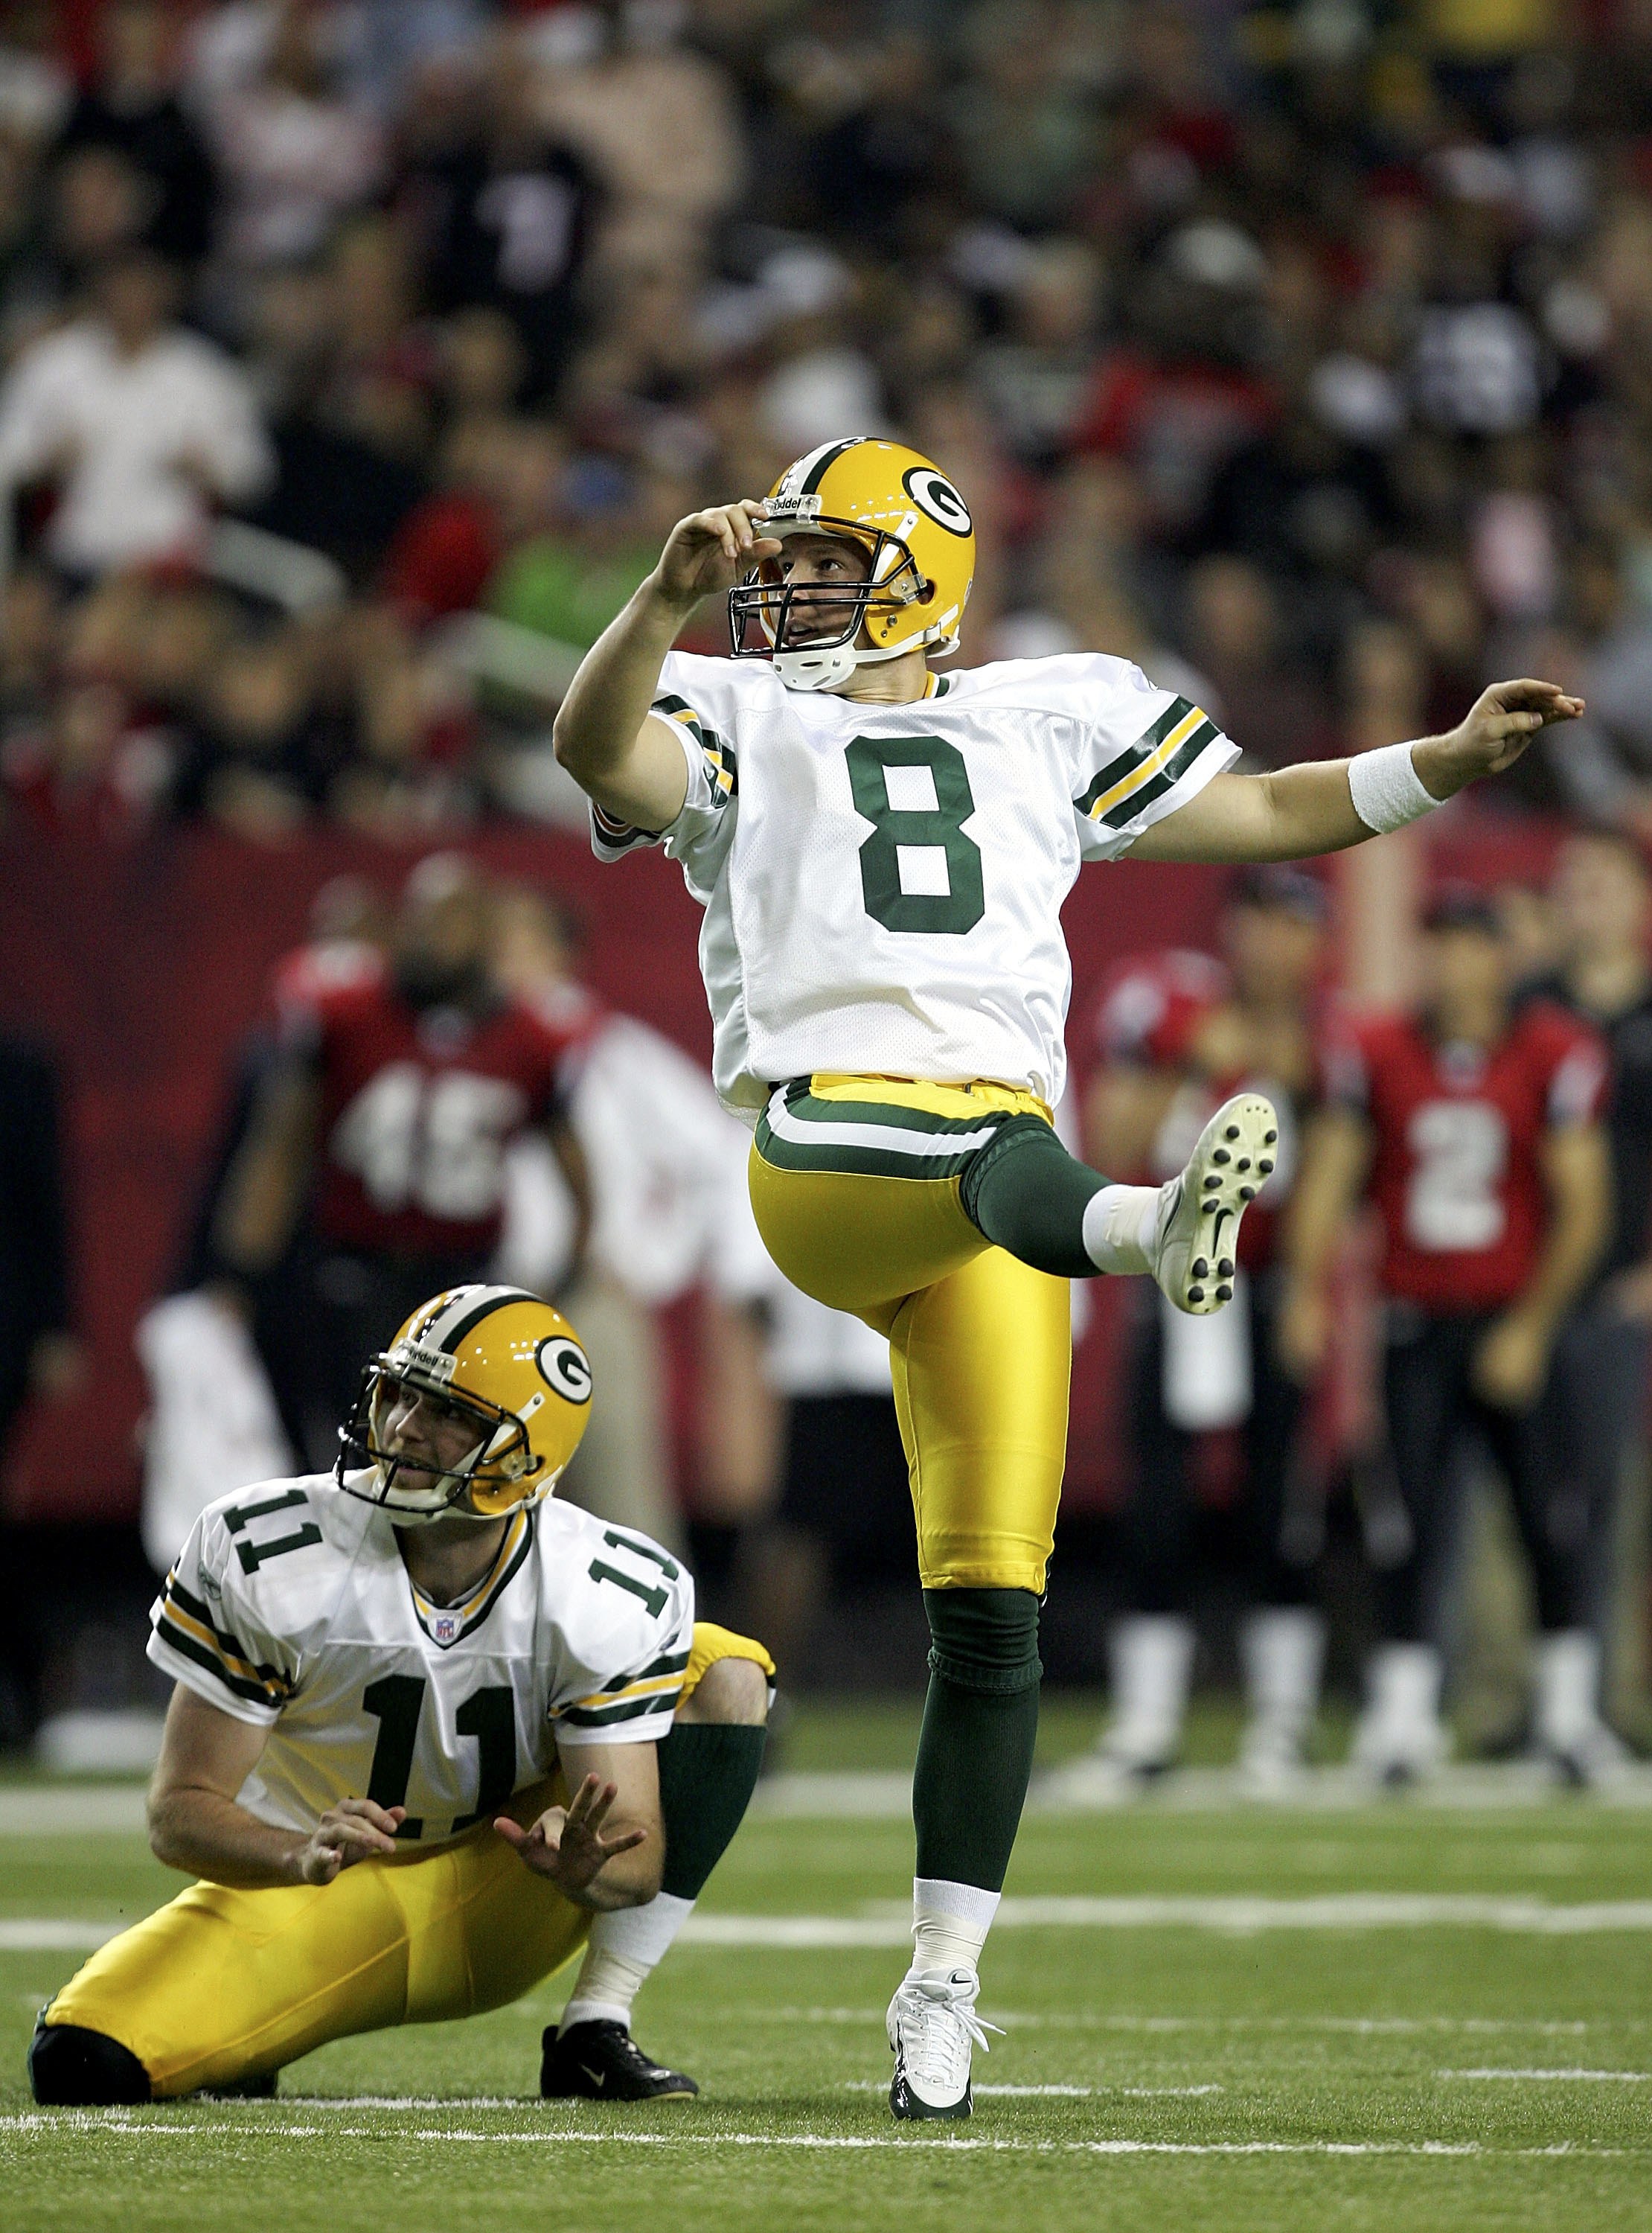 ATLANTA - NOVEMBER 13:  Ryan Longwell #8 of the Green Bay Packers watches a kick with teammate B.J. Sander #11 during their game against the Atlanta Falcons on November 13, 2005 at the Georgia Dome in Atlanta, Georgia.  (Photo by Streeter Lecka/Getty Imag